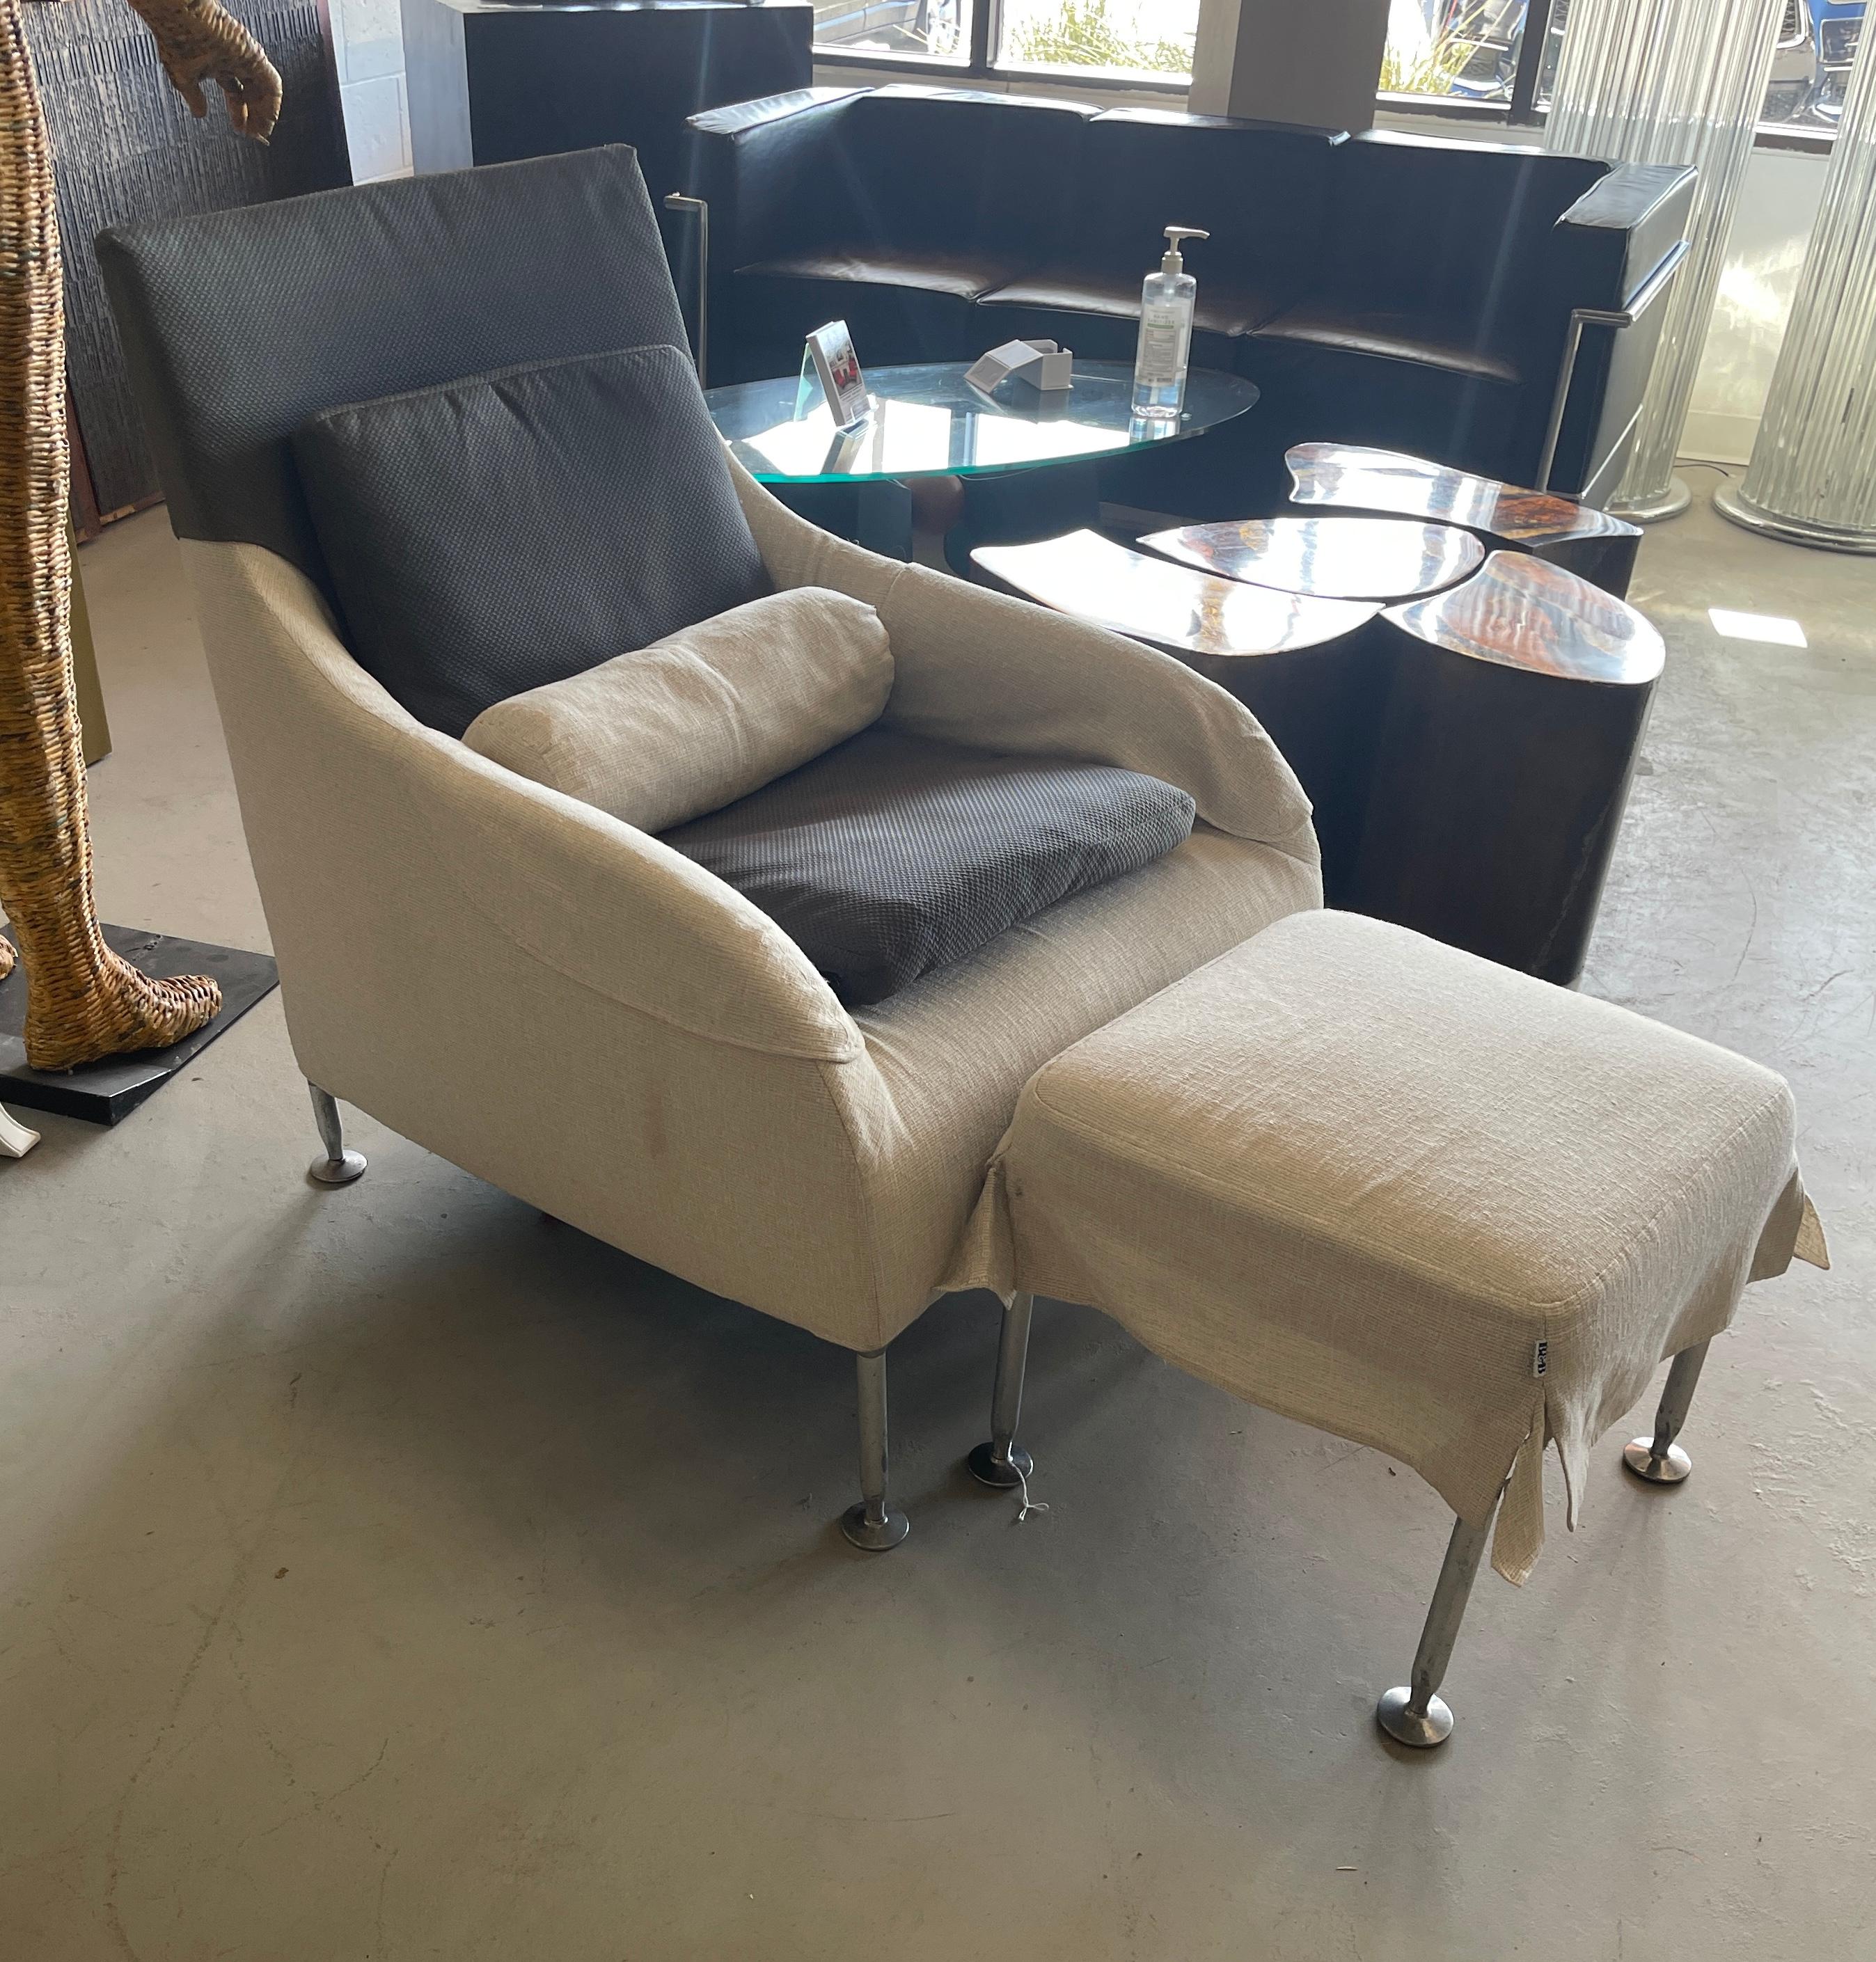 B & B Italia Florence chair and ottoman designed by Antonio Citterio. The chair has 2 pillows on it and 2 extra pillows. The ottoman has an extra cover as well. There is some extra brown/grey fabric. Lots of original tags and warranty cards. The